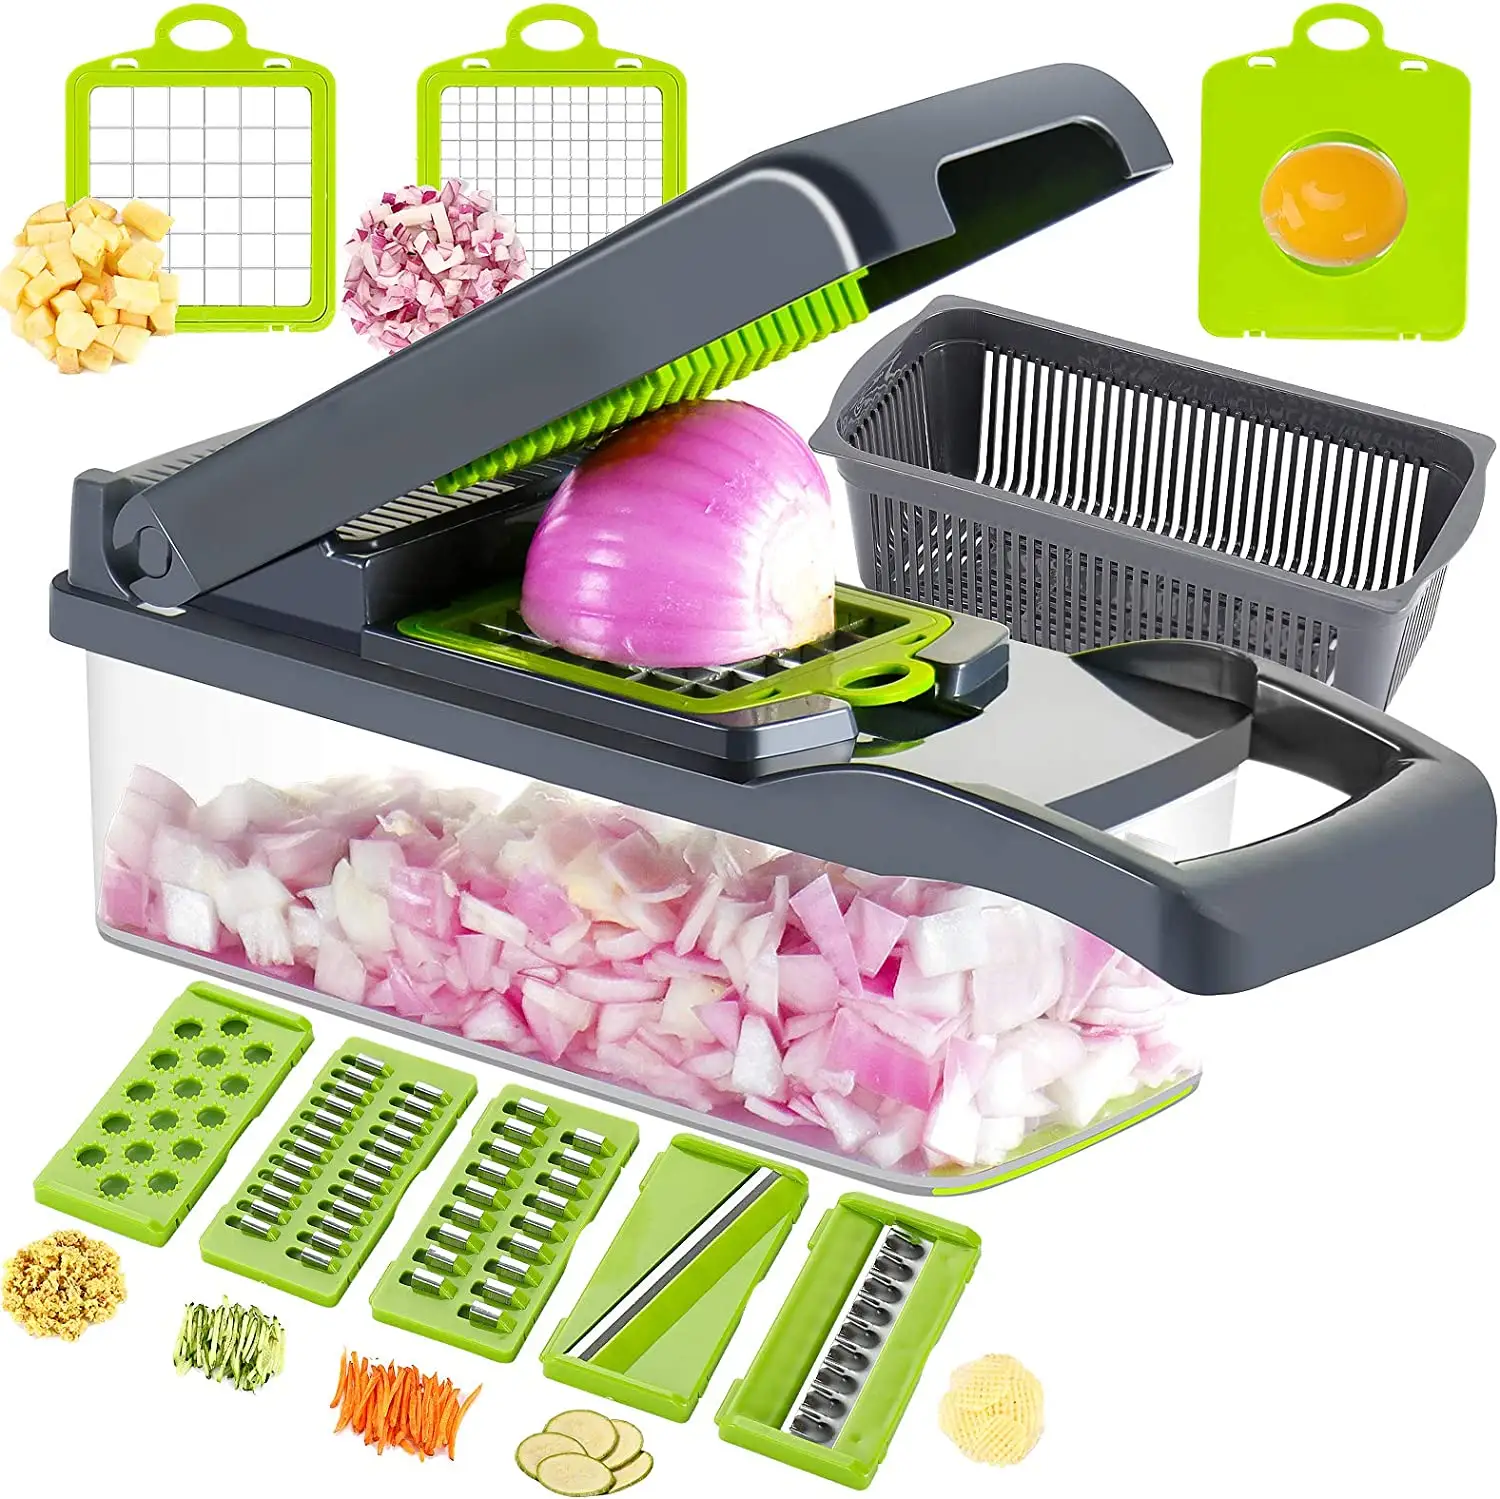 12 in 1 Multifunctional Manual Vegetable Chopper Saving Food Chopper - Pro Onion Chopper Vegetable Cutter and Dicers